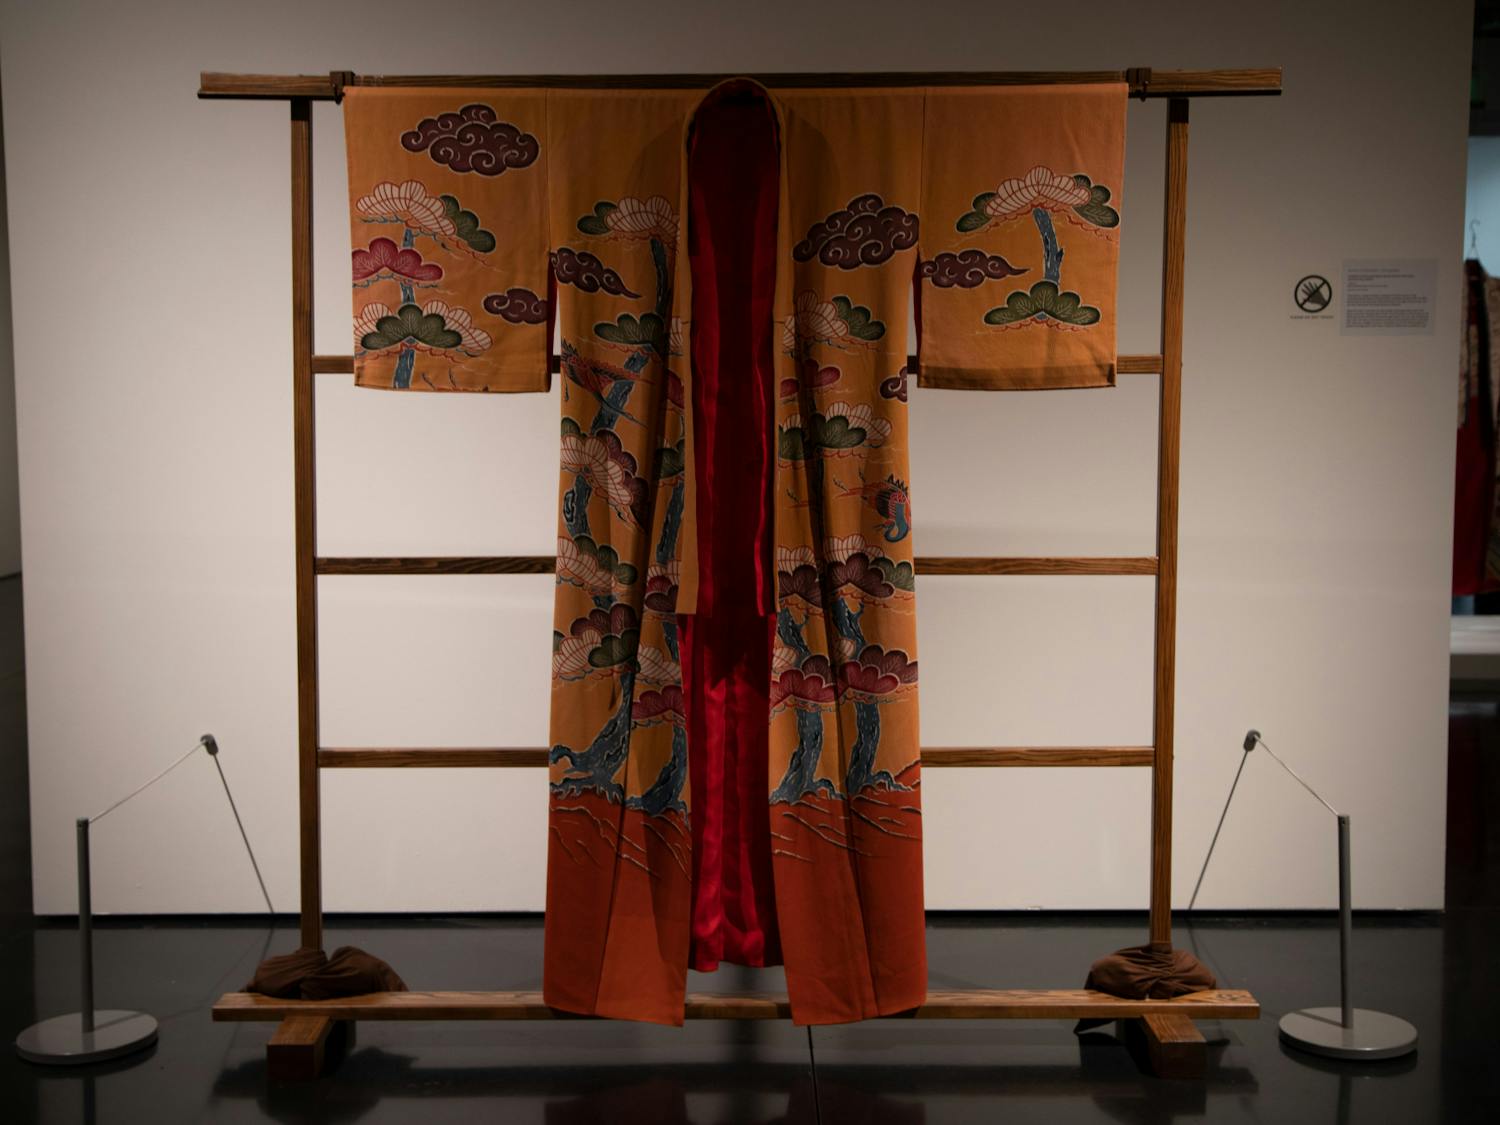 Traditional Japanese art “migrates” to the Whatcom Museum (Gallery)